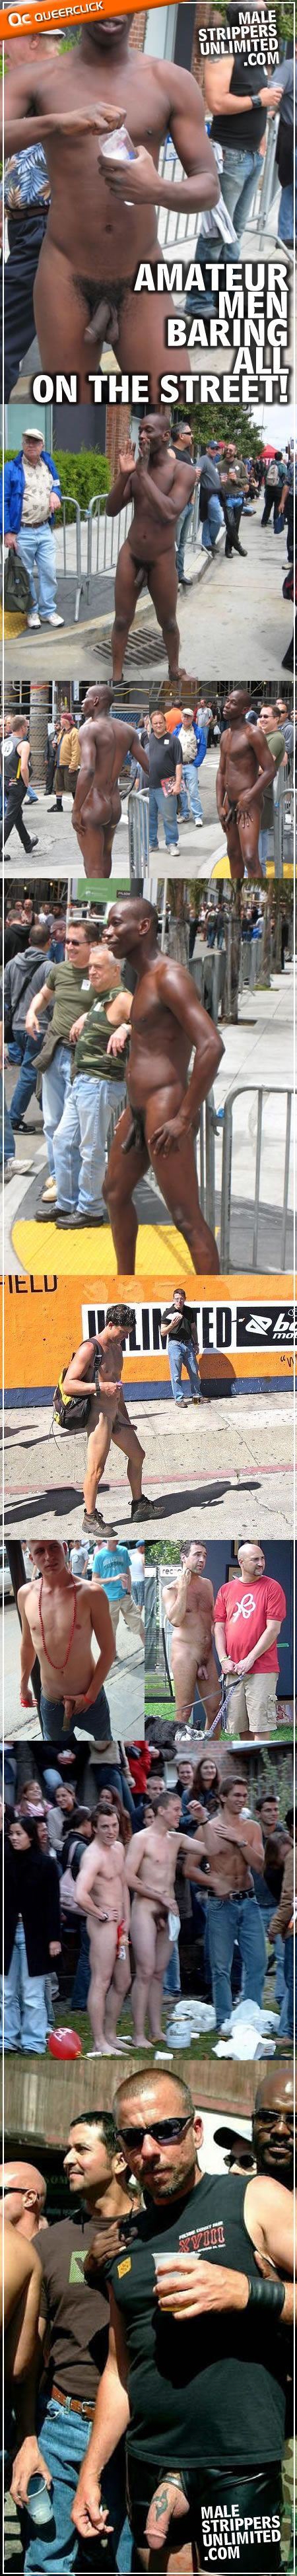 Male Strippers Unlimited: Amateur Hunks Public Nudity